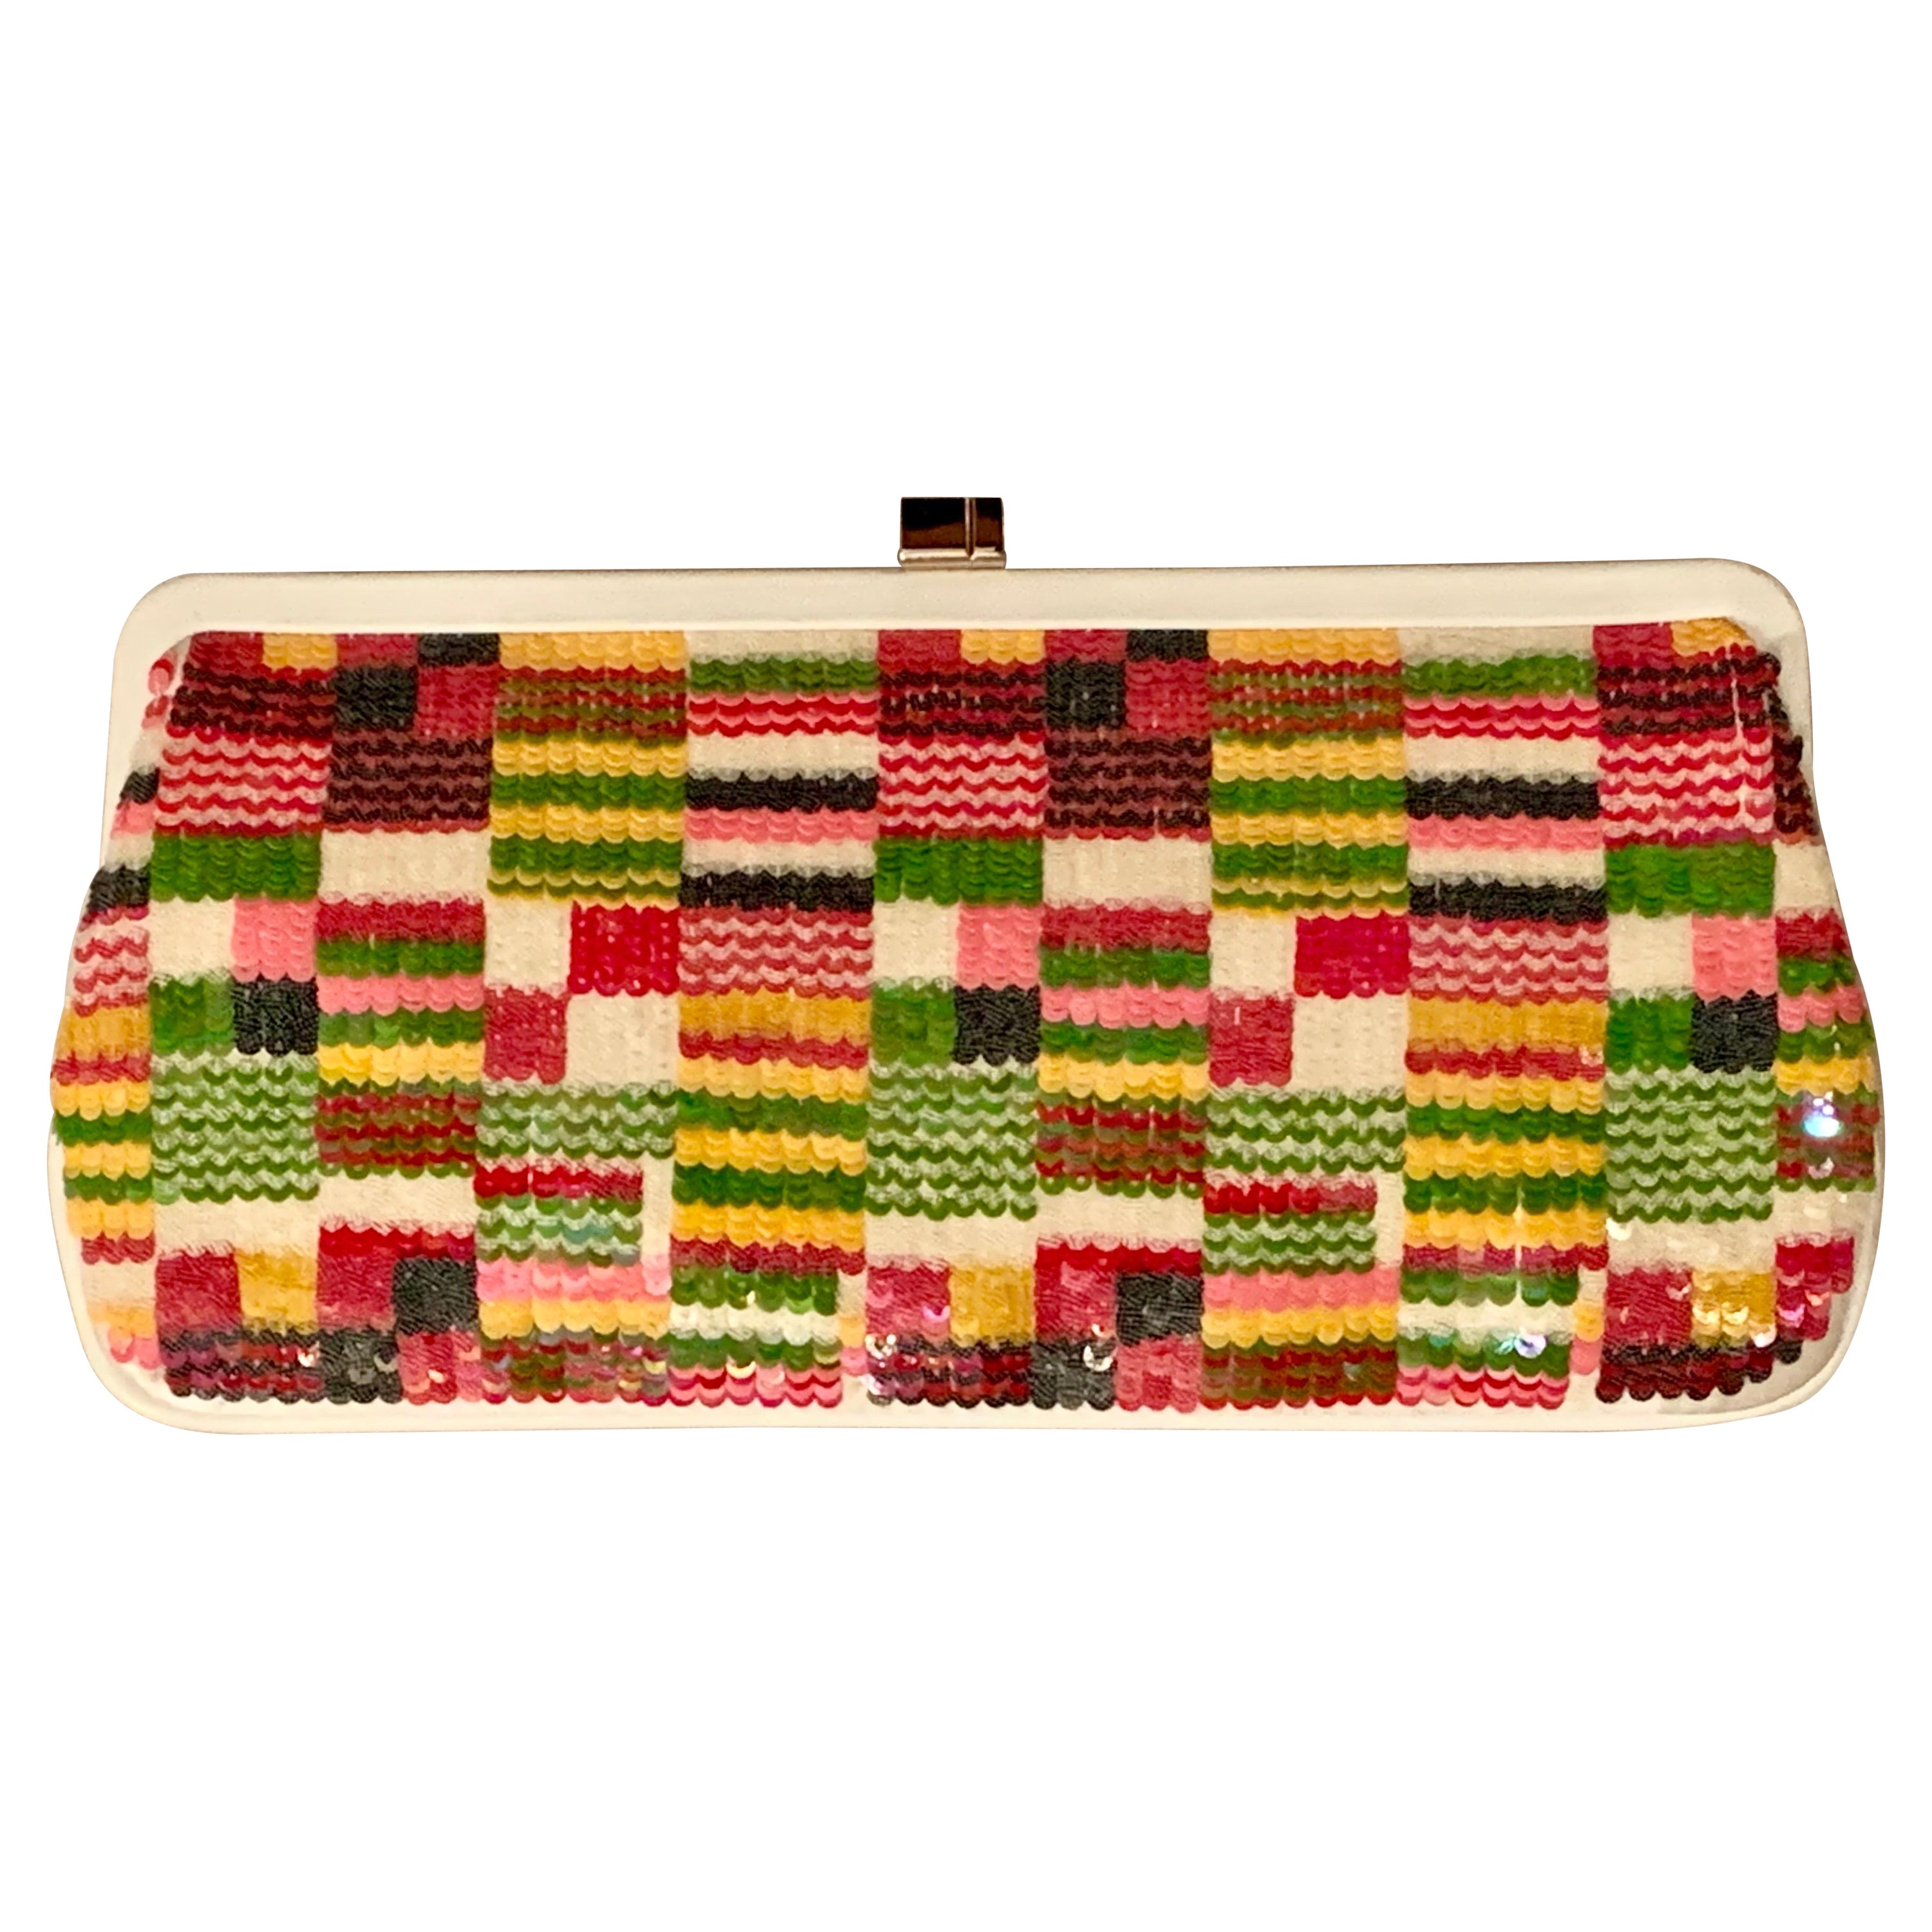 Lambertson Truex Leather and Multi Color Sequin Clutch Bag For Sale